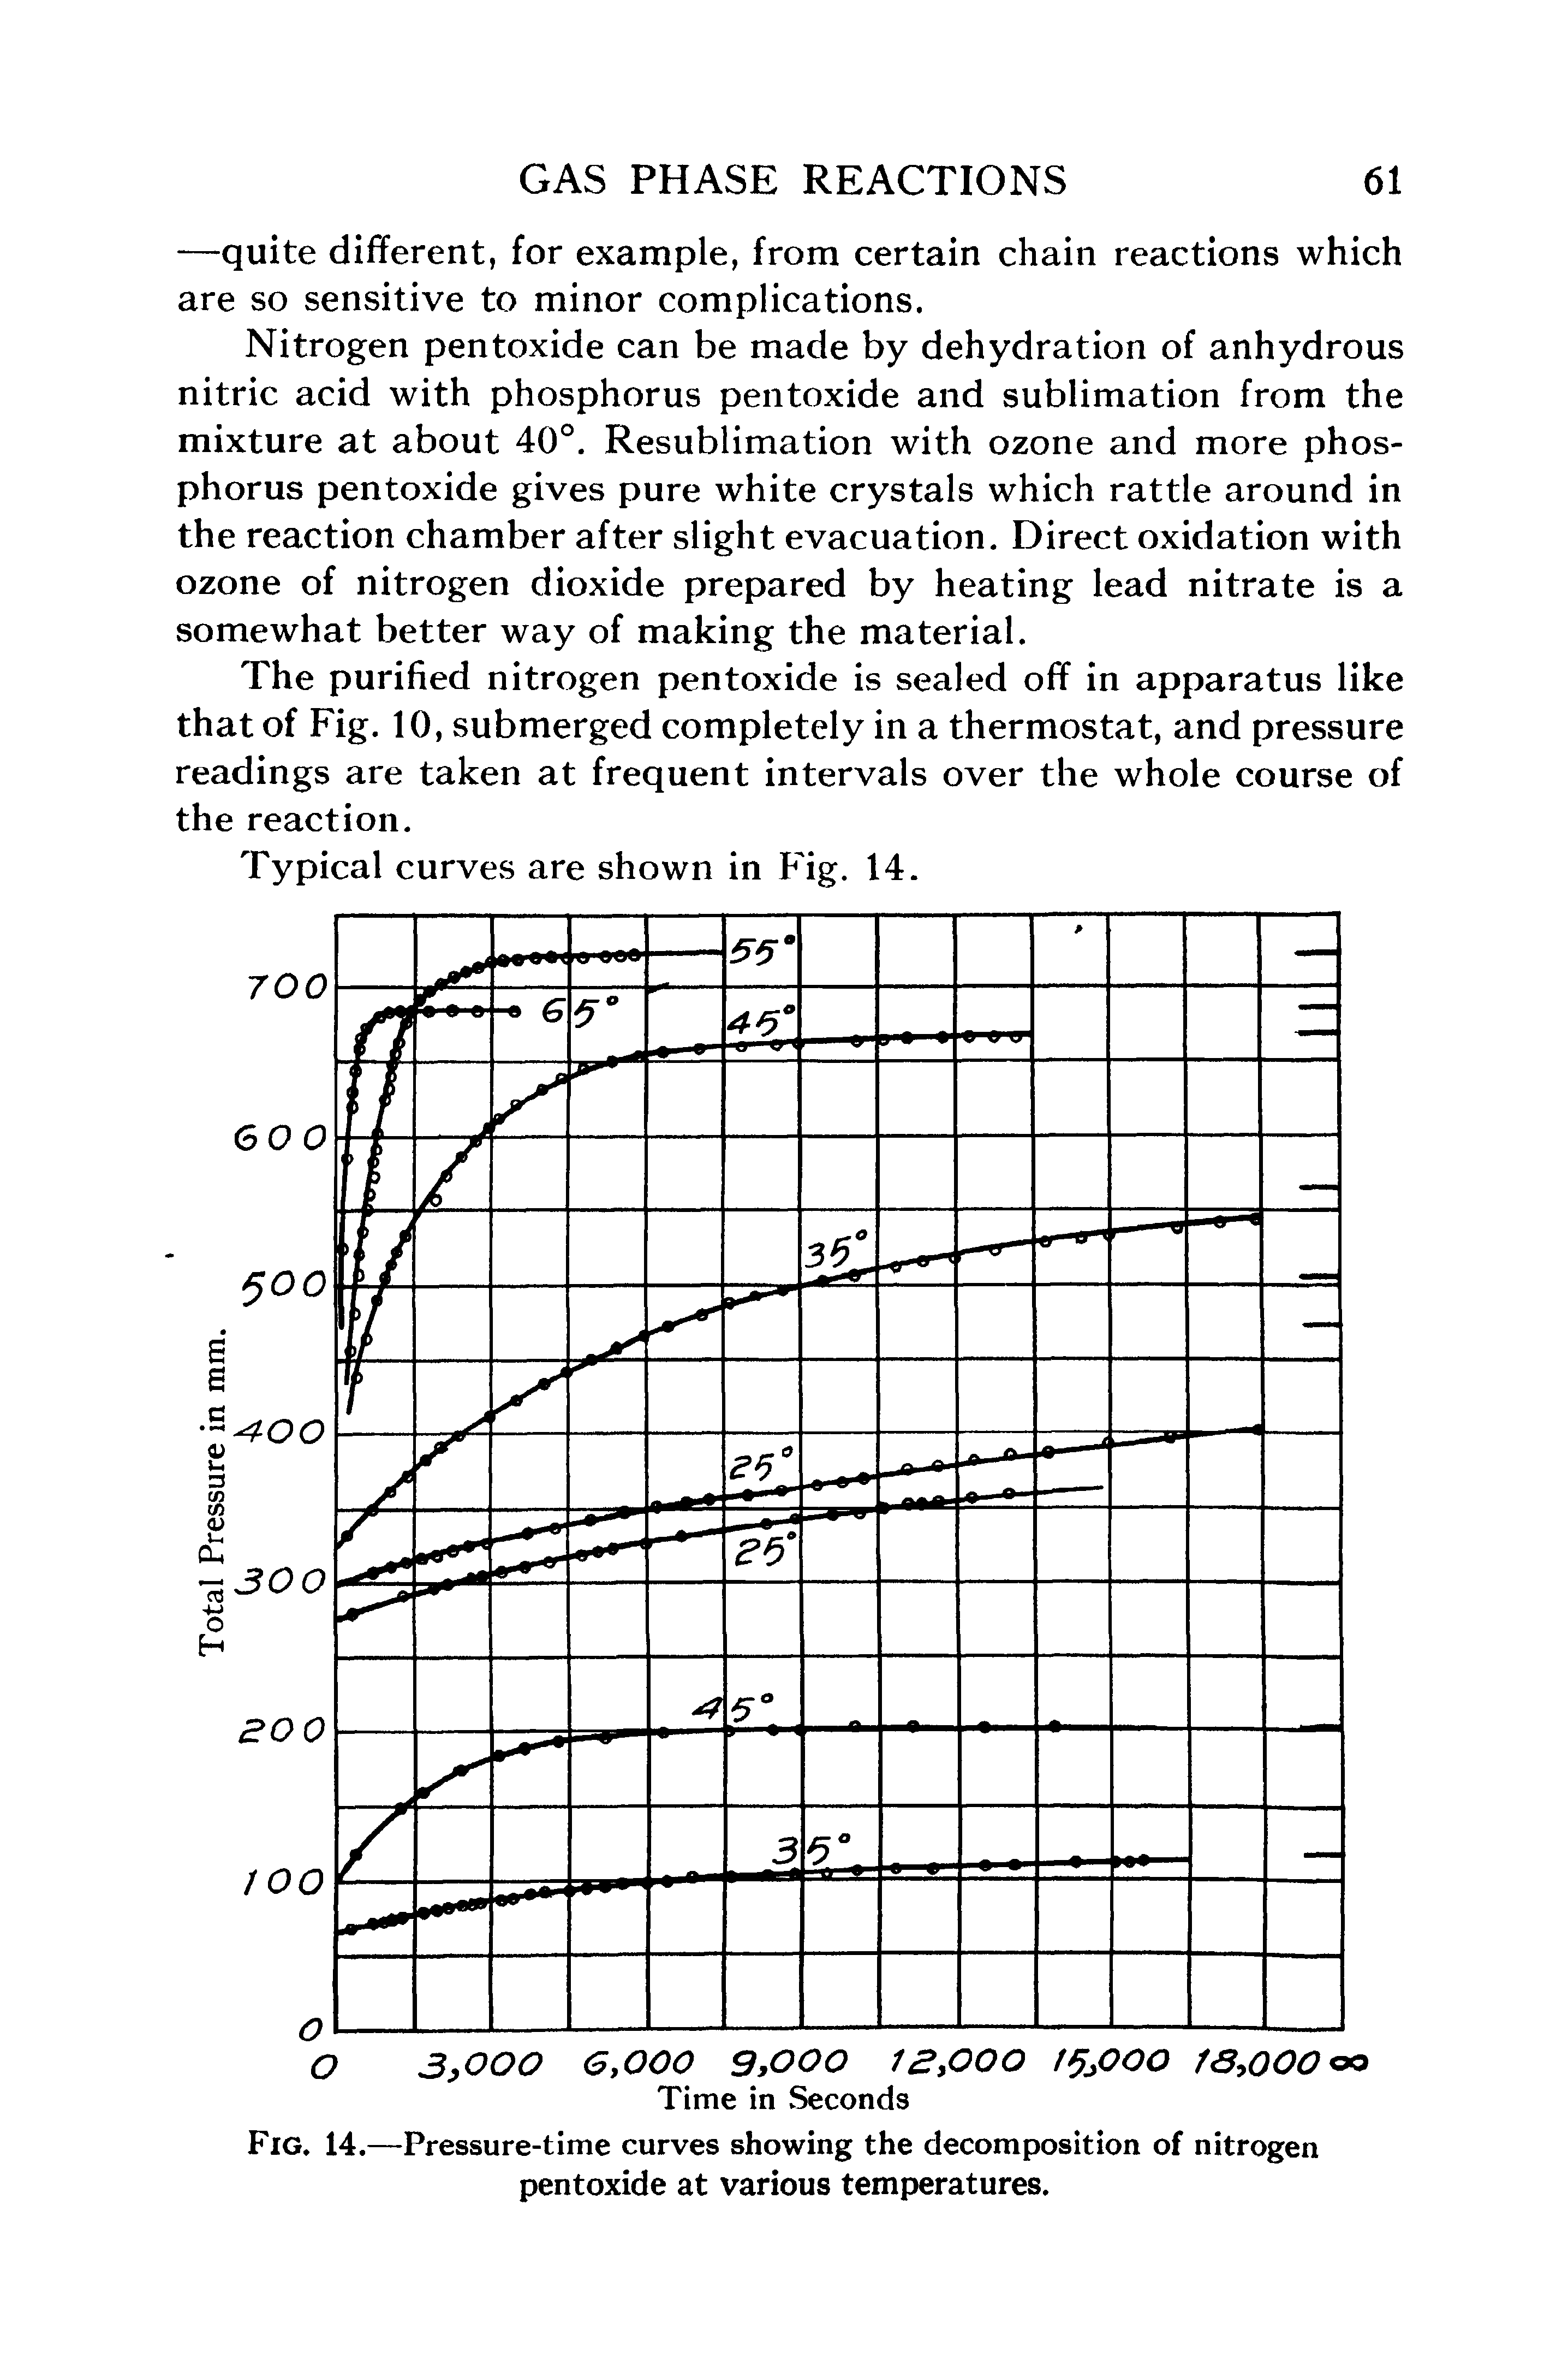 Fig. 14.—Pressure-time curves showing the decomposition of nitrogen pentoxide at various temperatures.